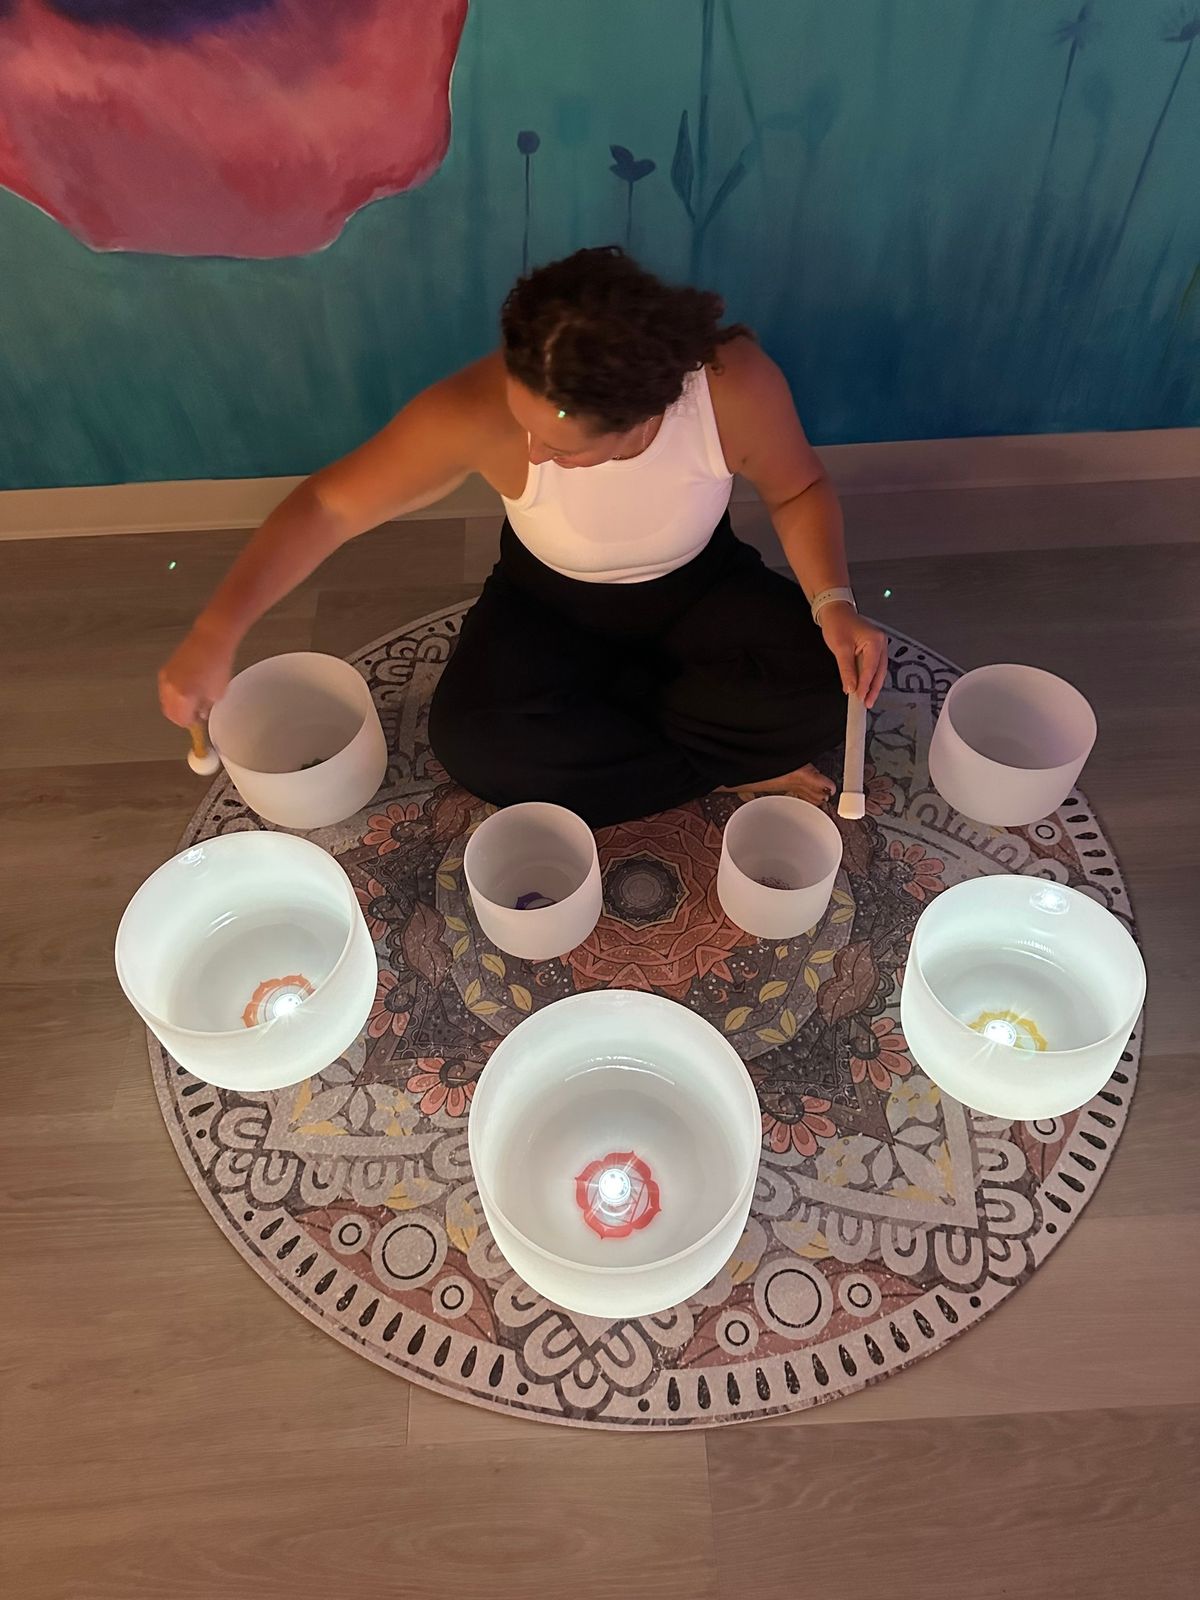 60 Minute Sound Bath with Shine Therapy